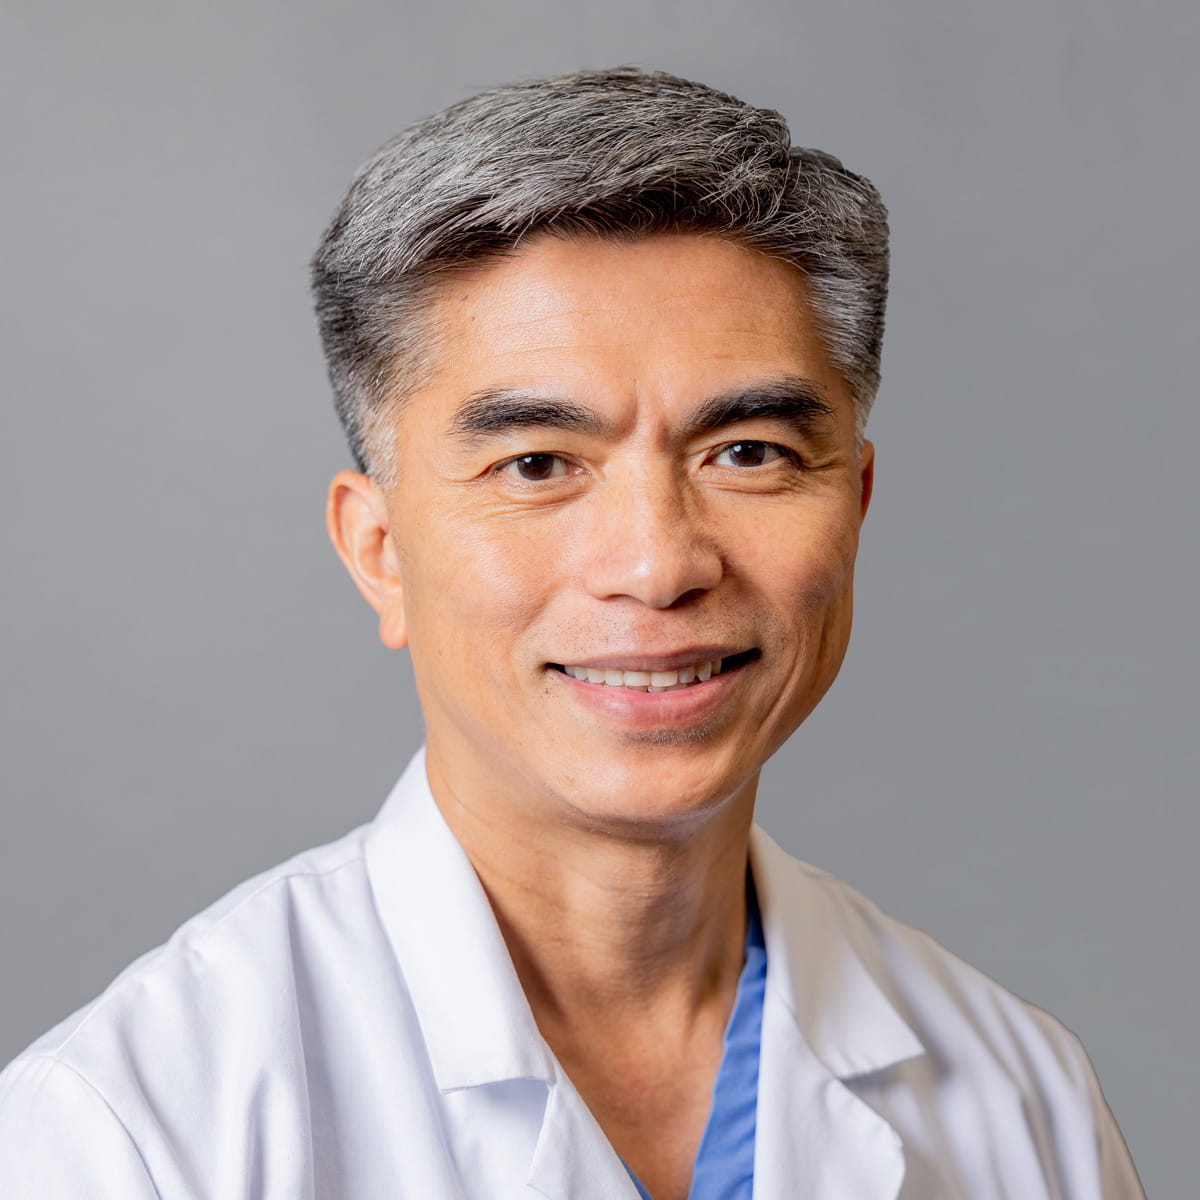 A friendly image of Tung Nguyen MD